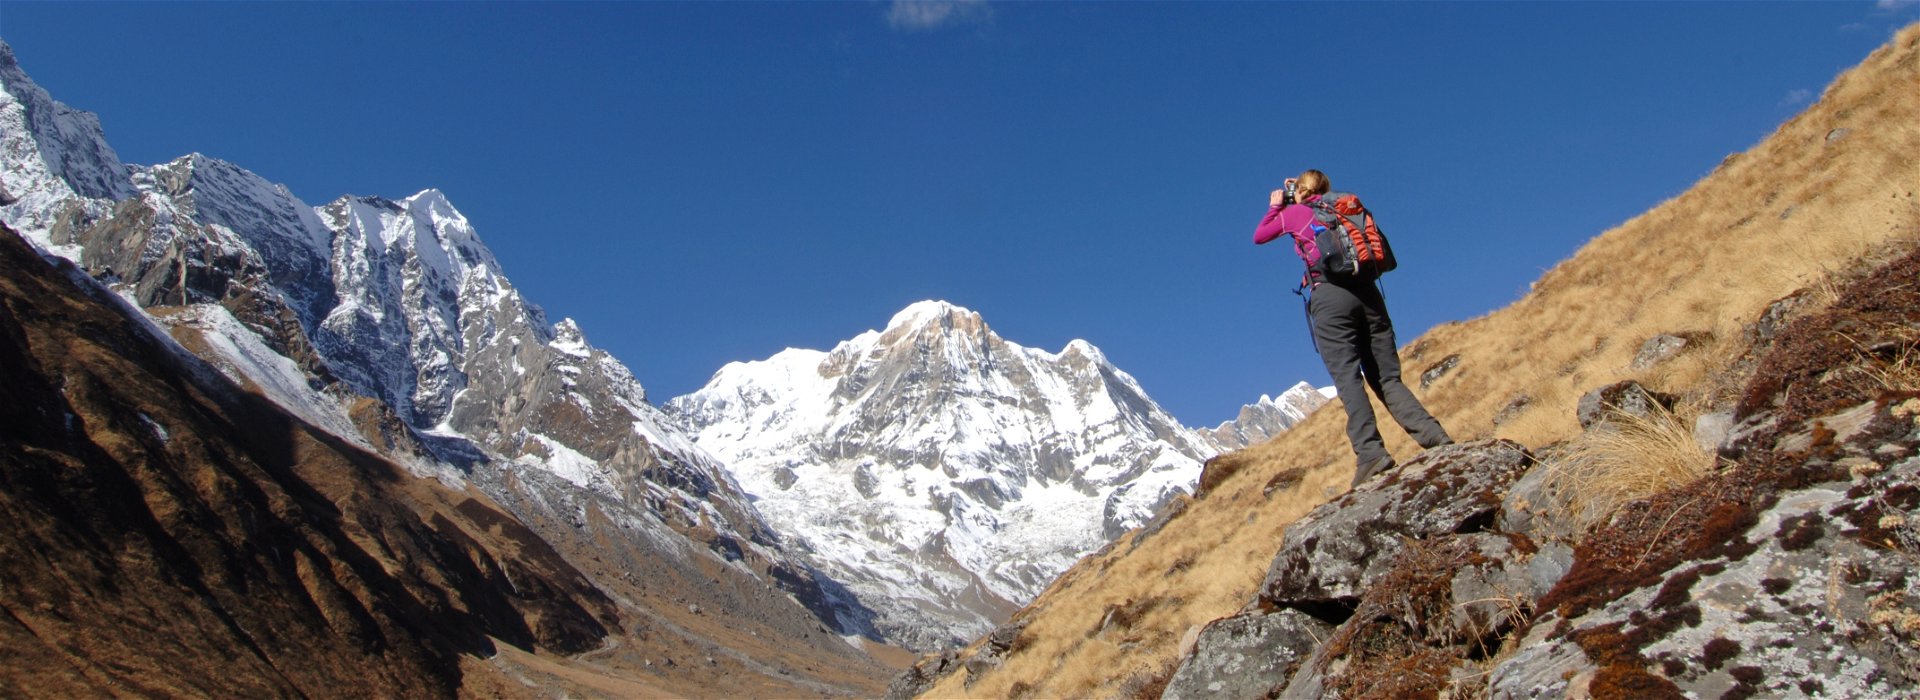 Trekking to Annapurna Basecamp: your questions answered 